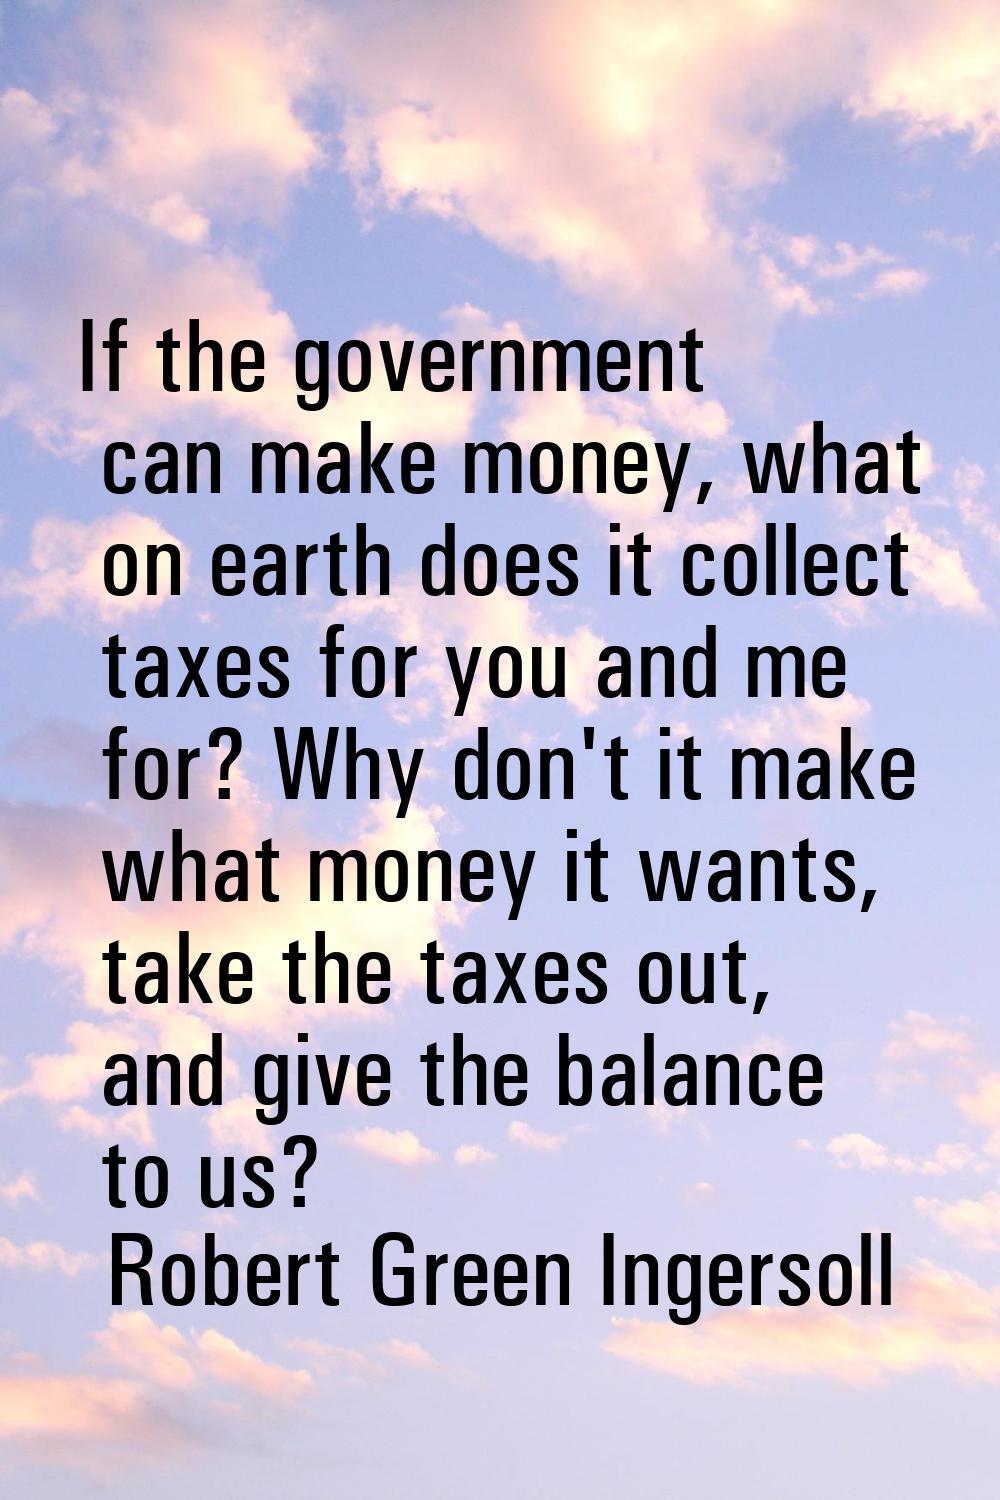 If the government can make money, what on earth does it collect taxes for you and me for? Why don't